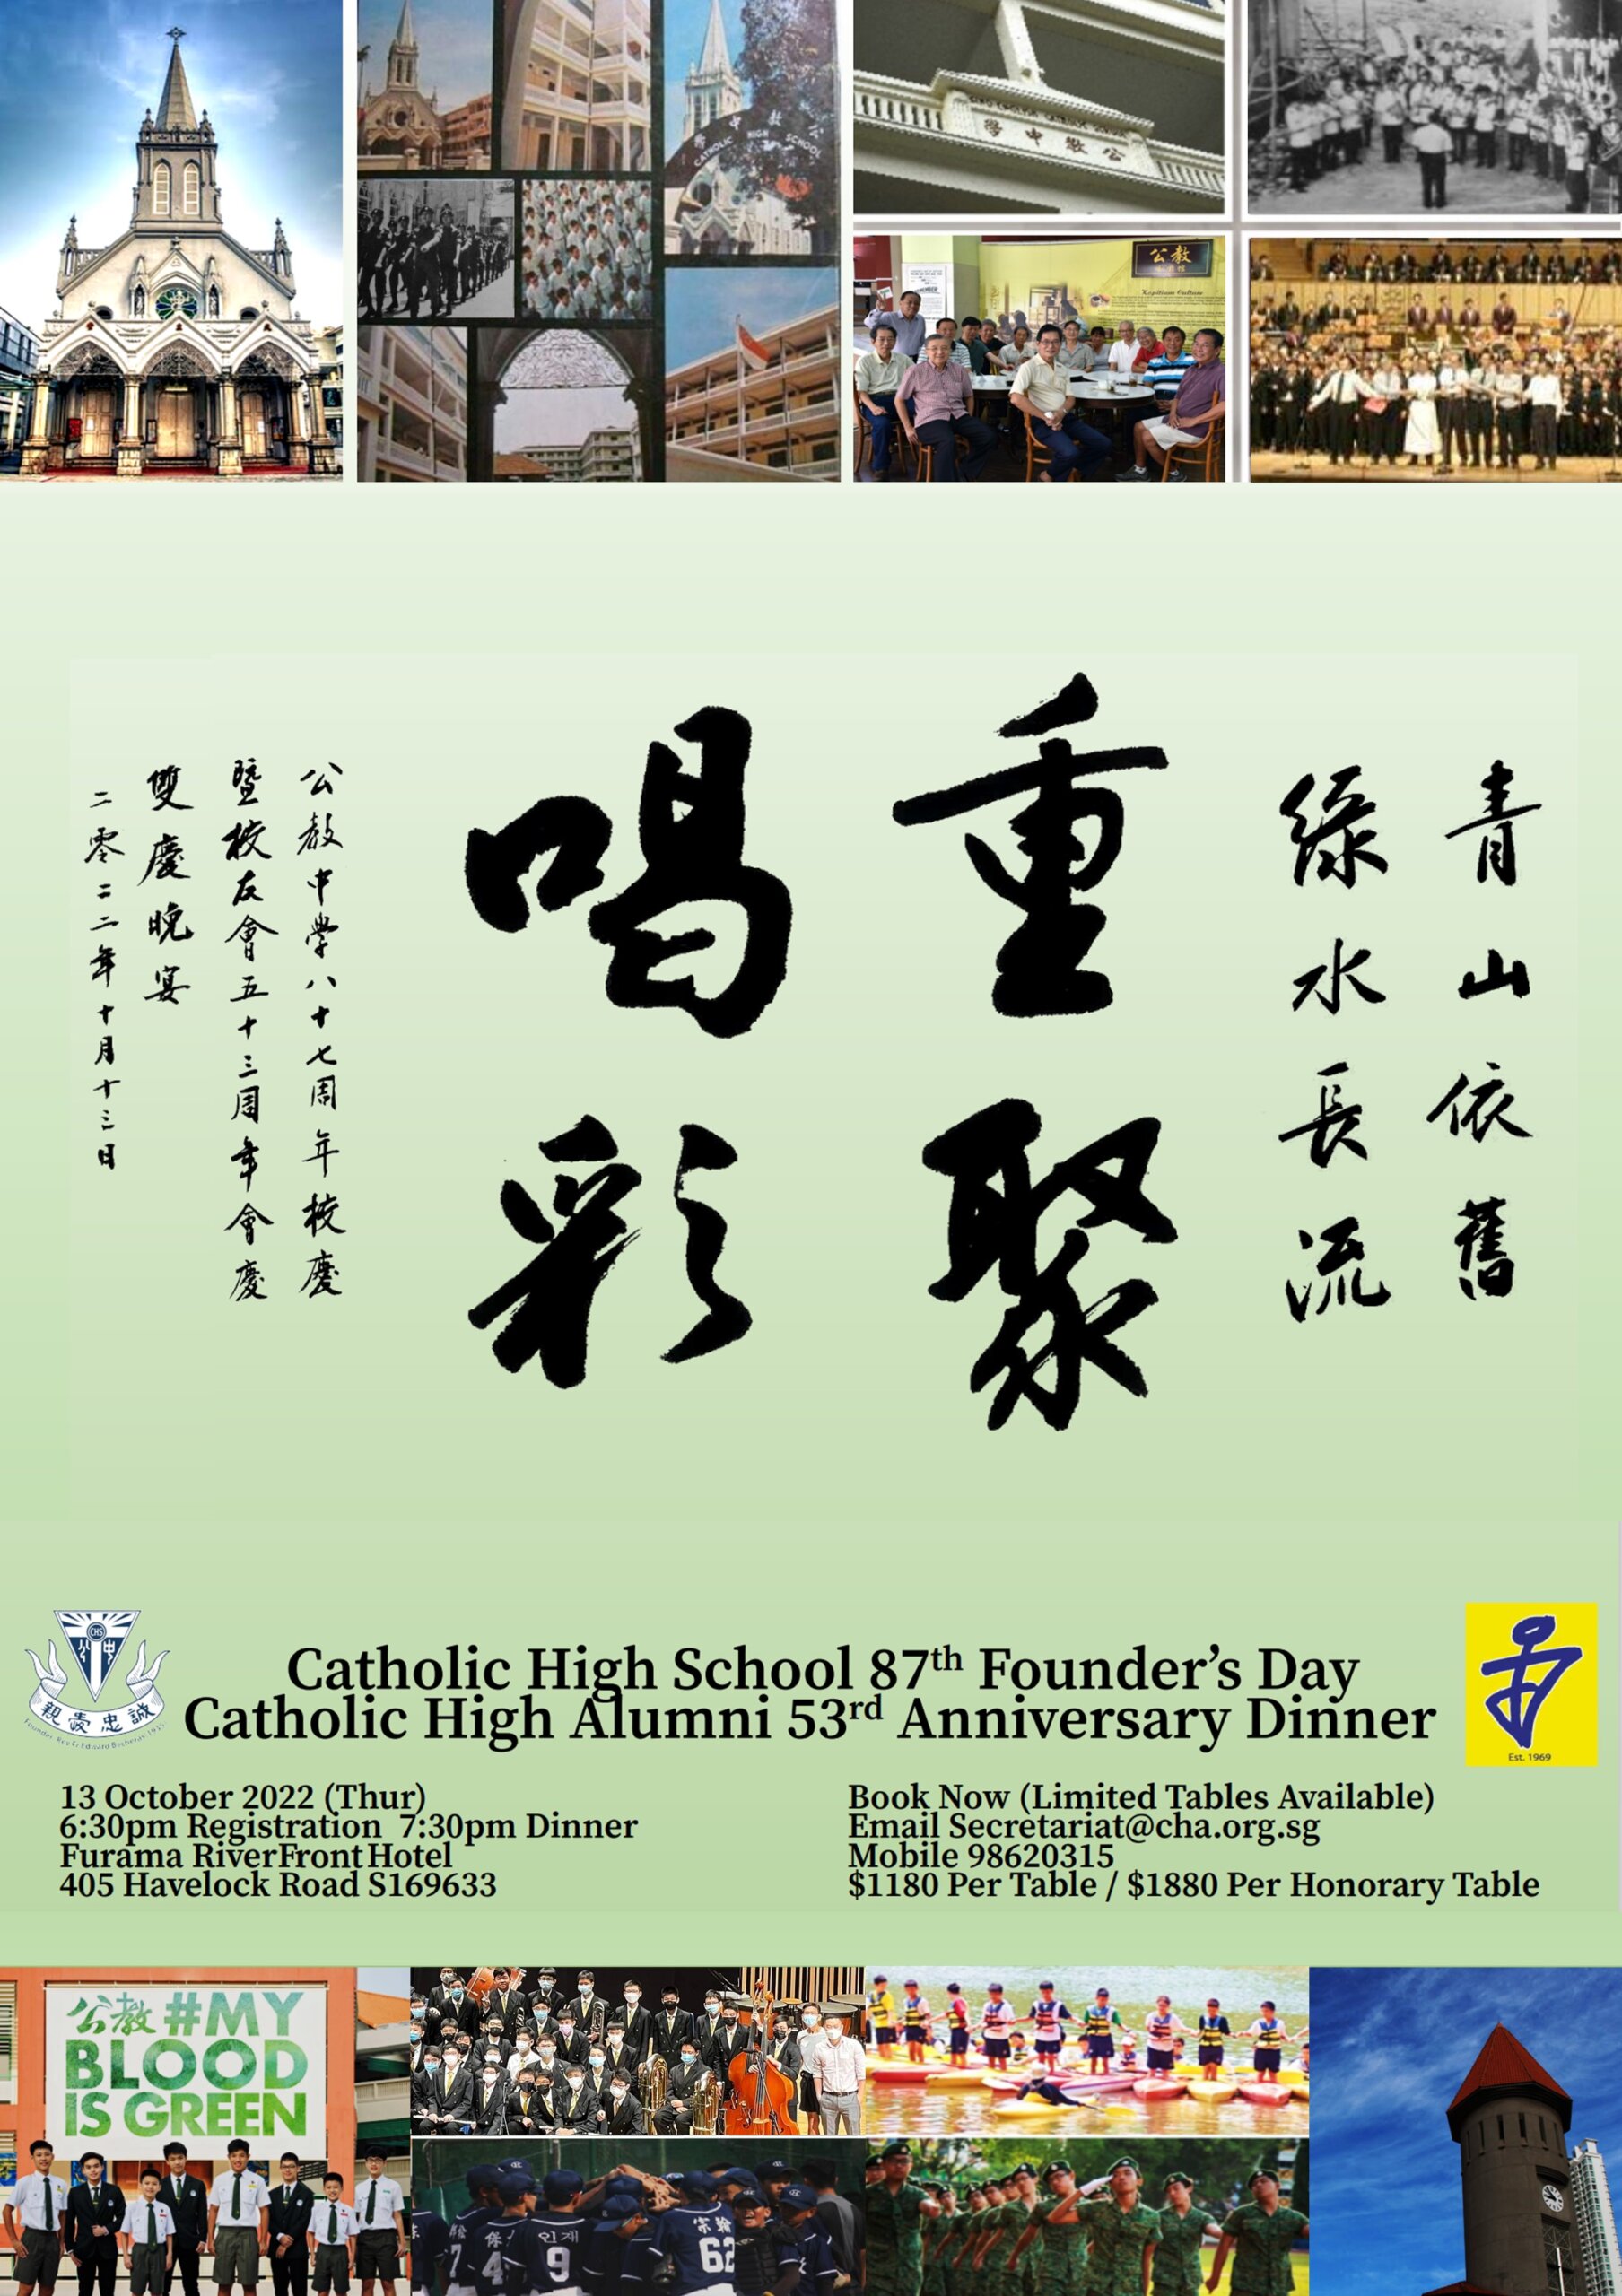 CHS 87th Founder's Day and CHA 53rd Anniversary Dinner